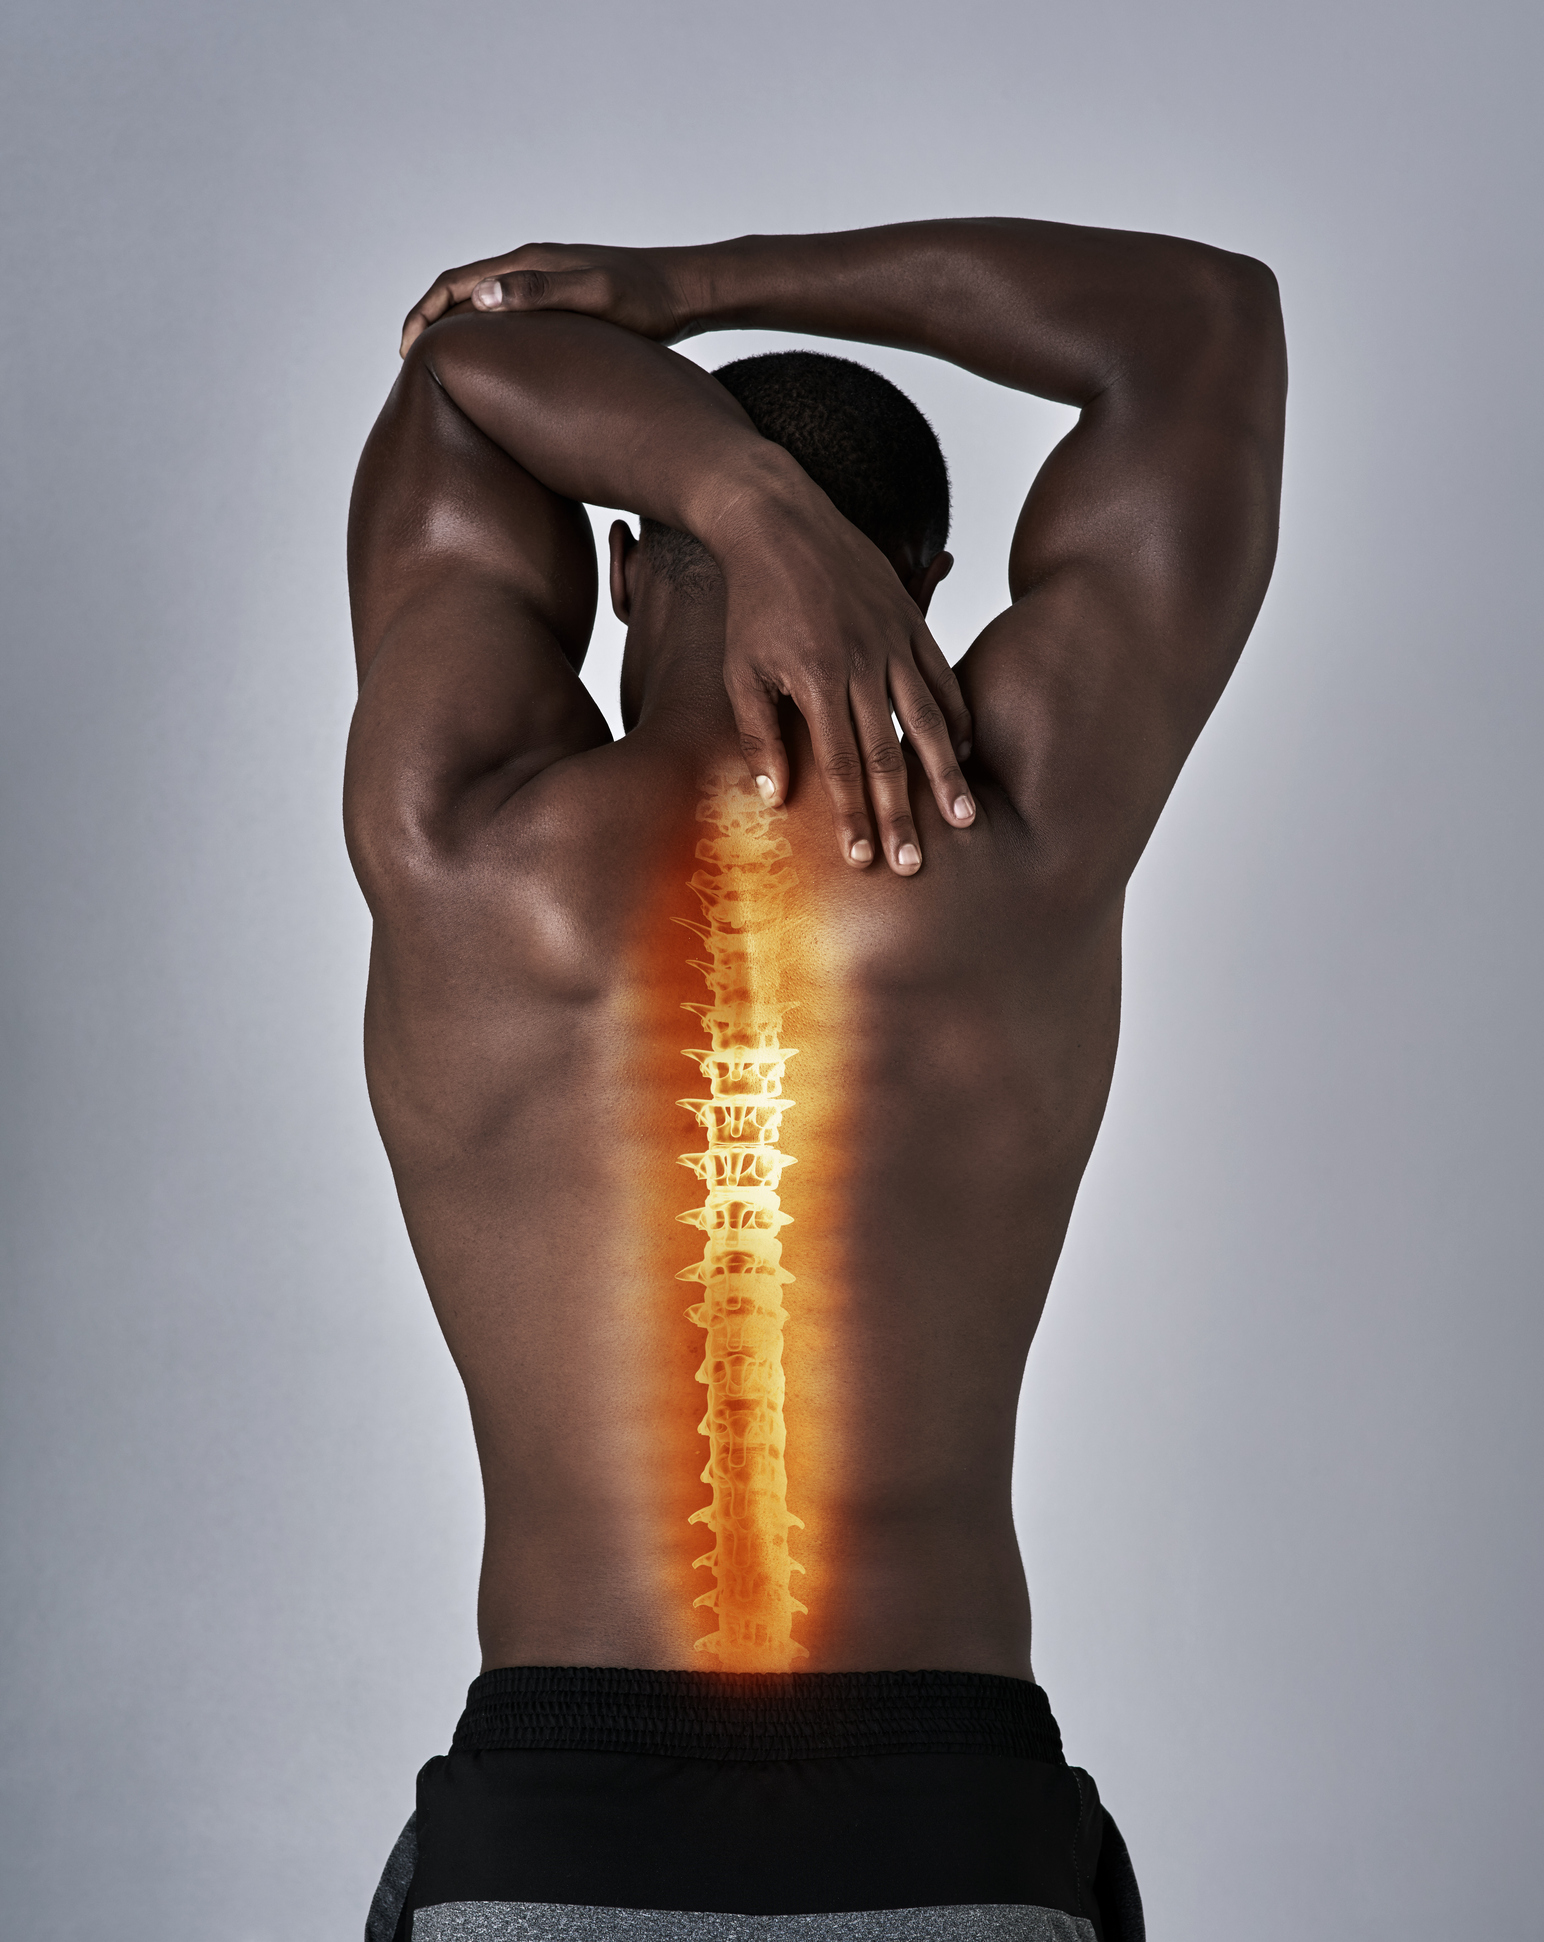 https://paininjuryrelief.com/wp-content/uploads/2021/10/Herniated-Disc-Exercises-Pain-Management-Injury-Relief.jpg